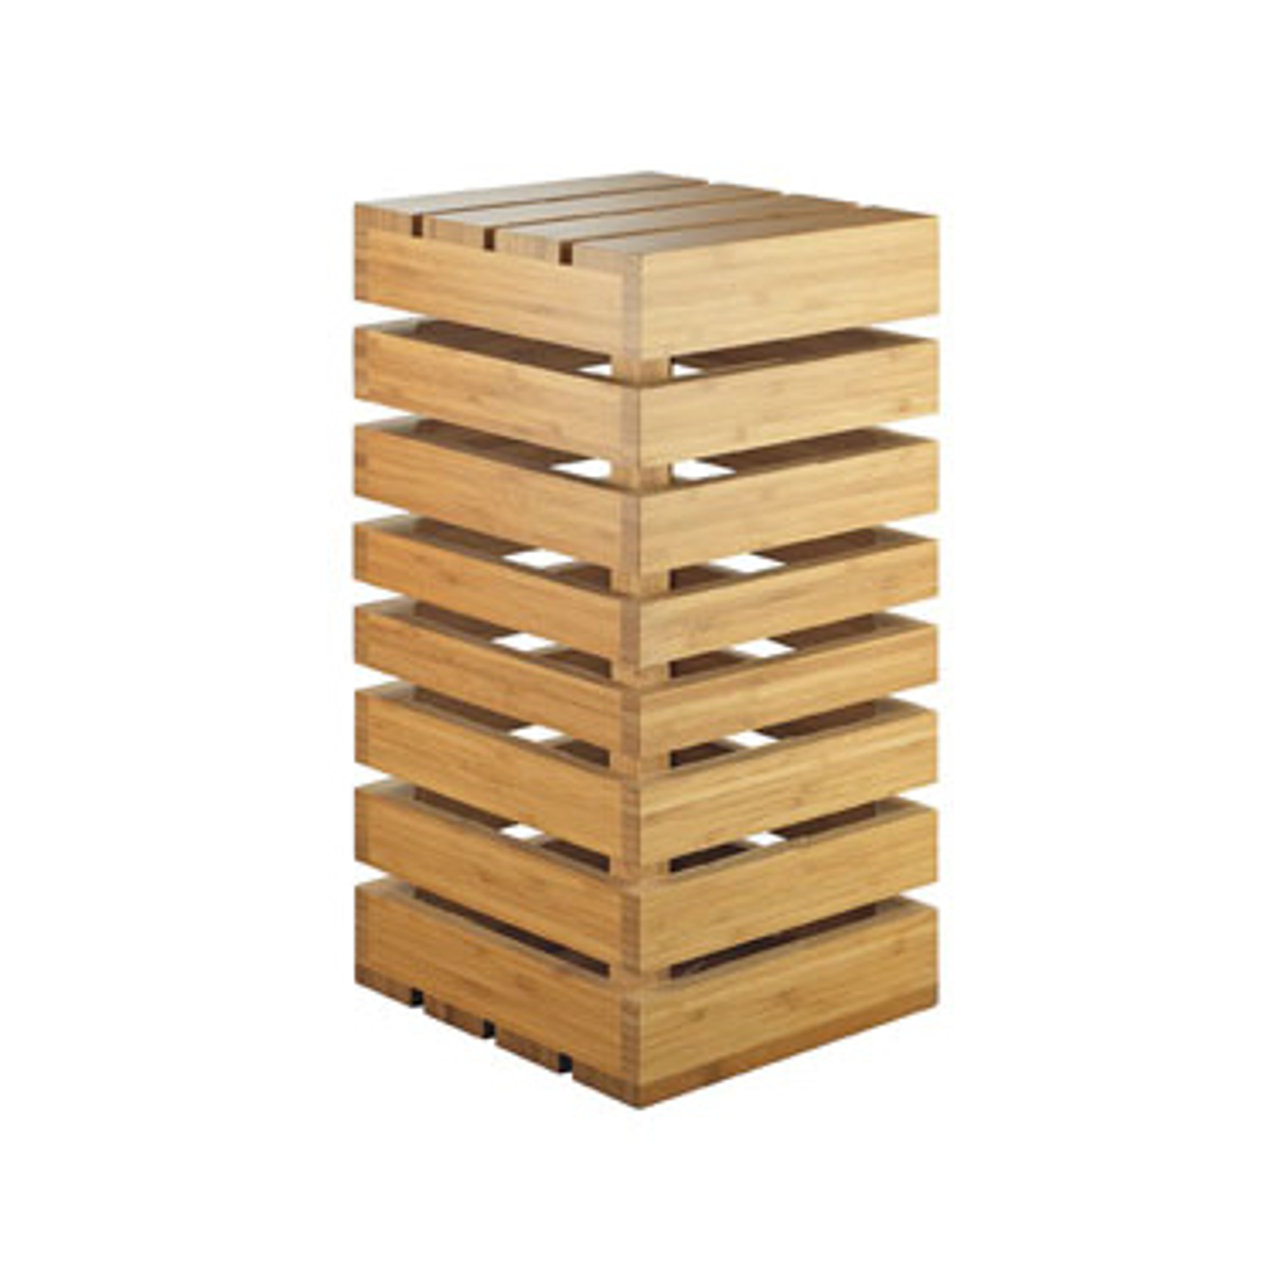 Display Crate Tower, 9"W x 9"D x 18"H, square, slotted sides for shelving, open base, solid top, can be flipped and used a crate basket, bamboo